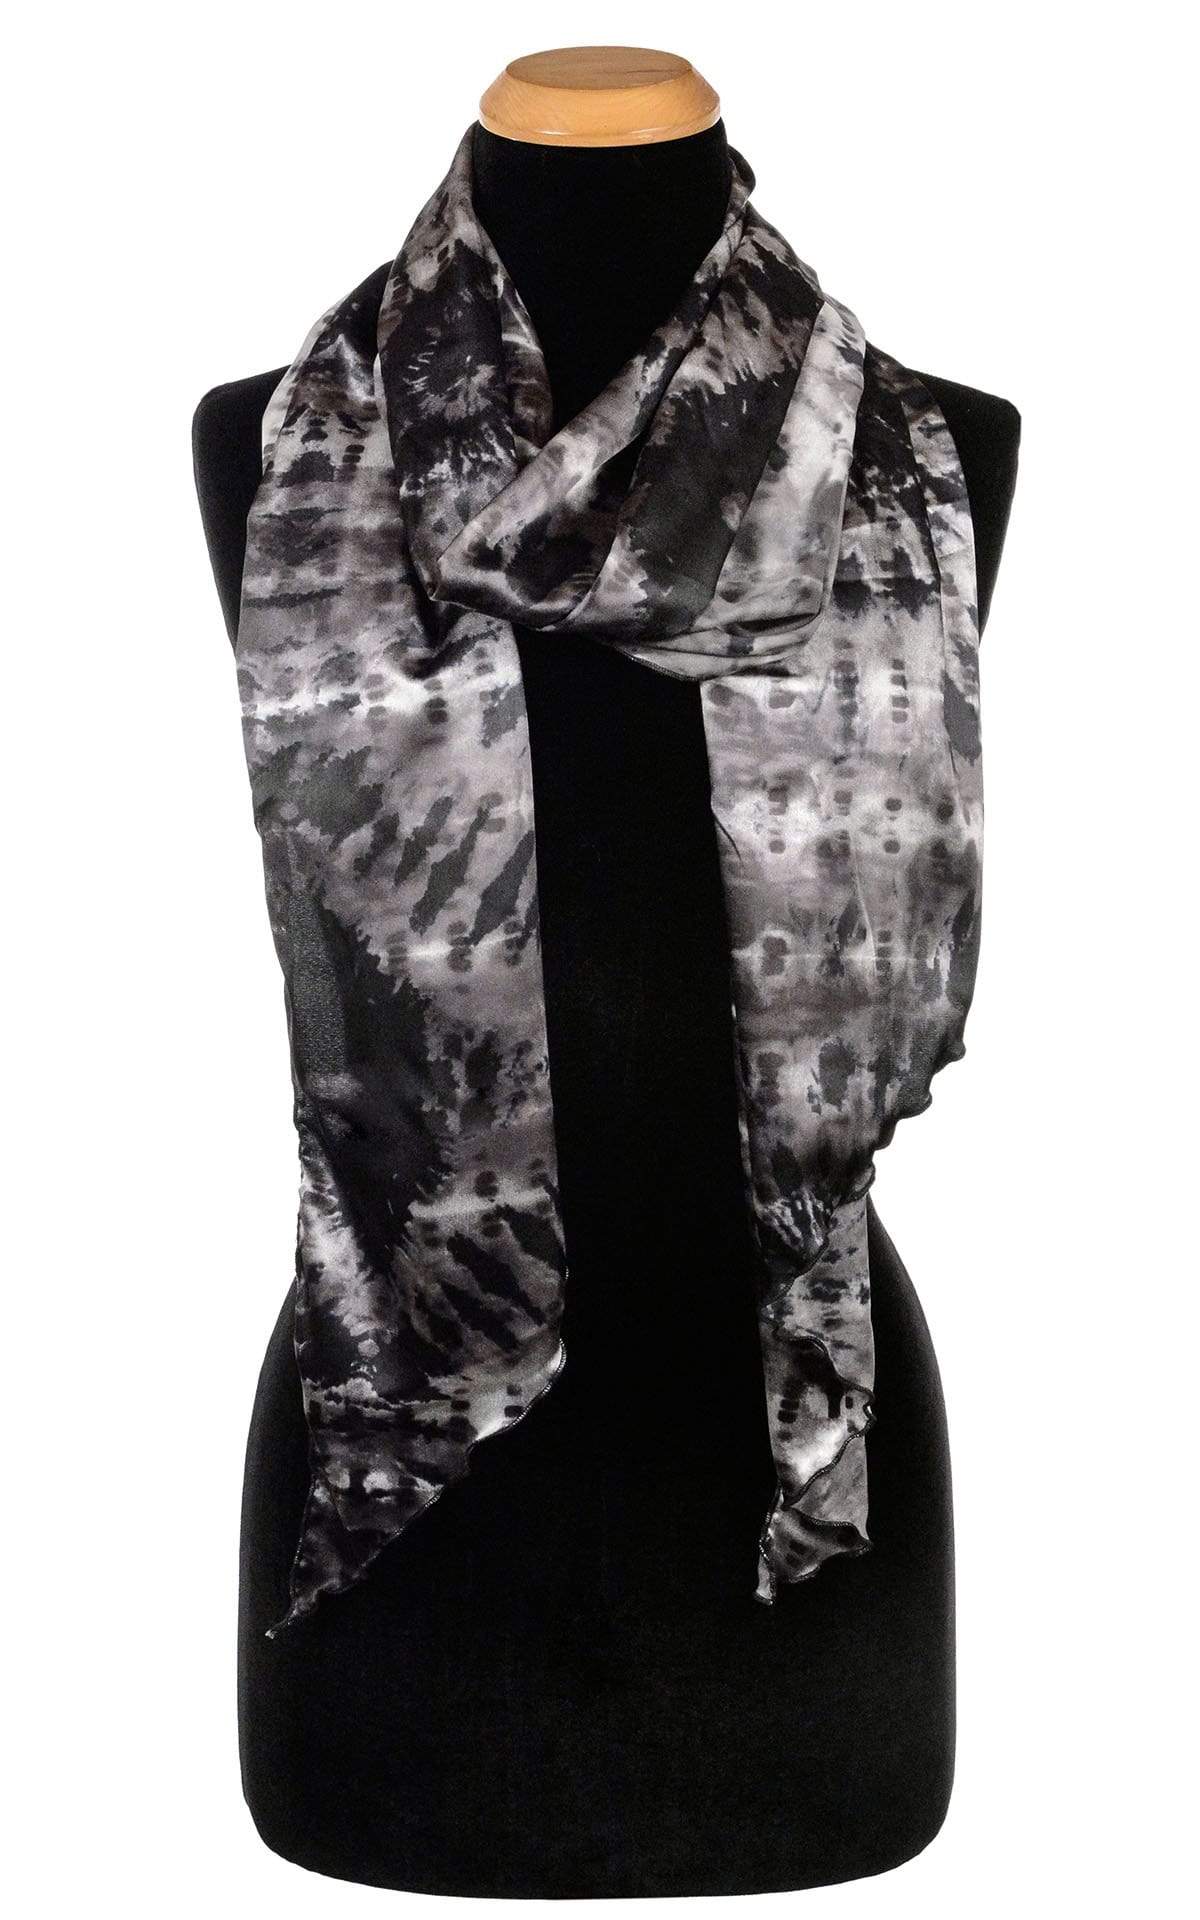 Women’s  Large Handkerchief Scarf, Wrap on Mannequin wrapped | Egyptian Scarab, Black, Gray, and off-white tie-dye | Handmade in Seattle WA | Pandemonium Millinery